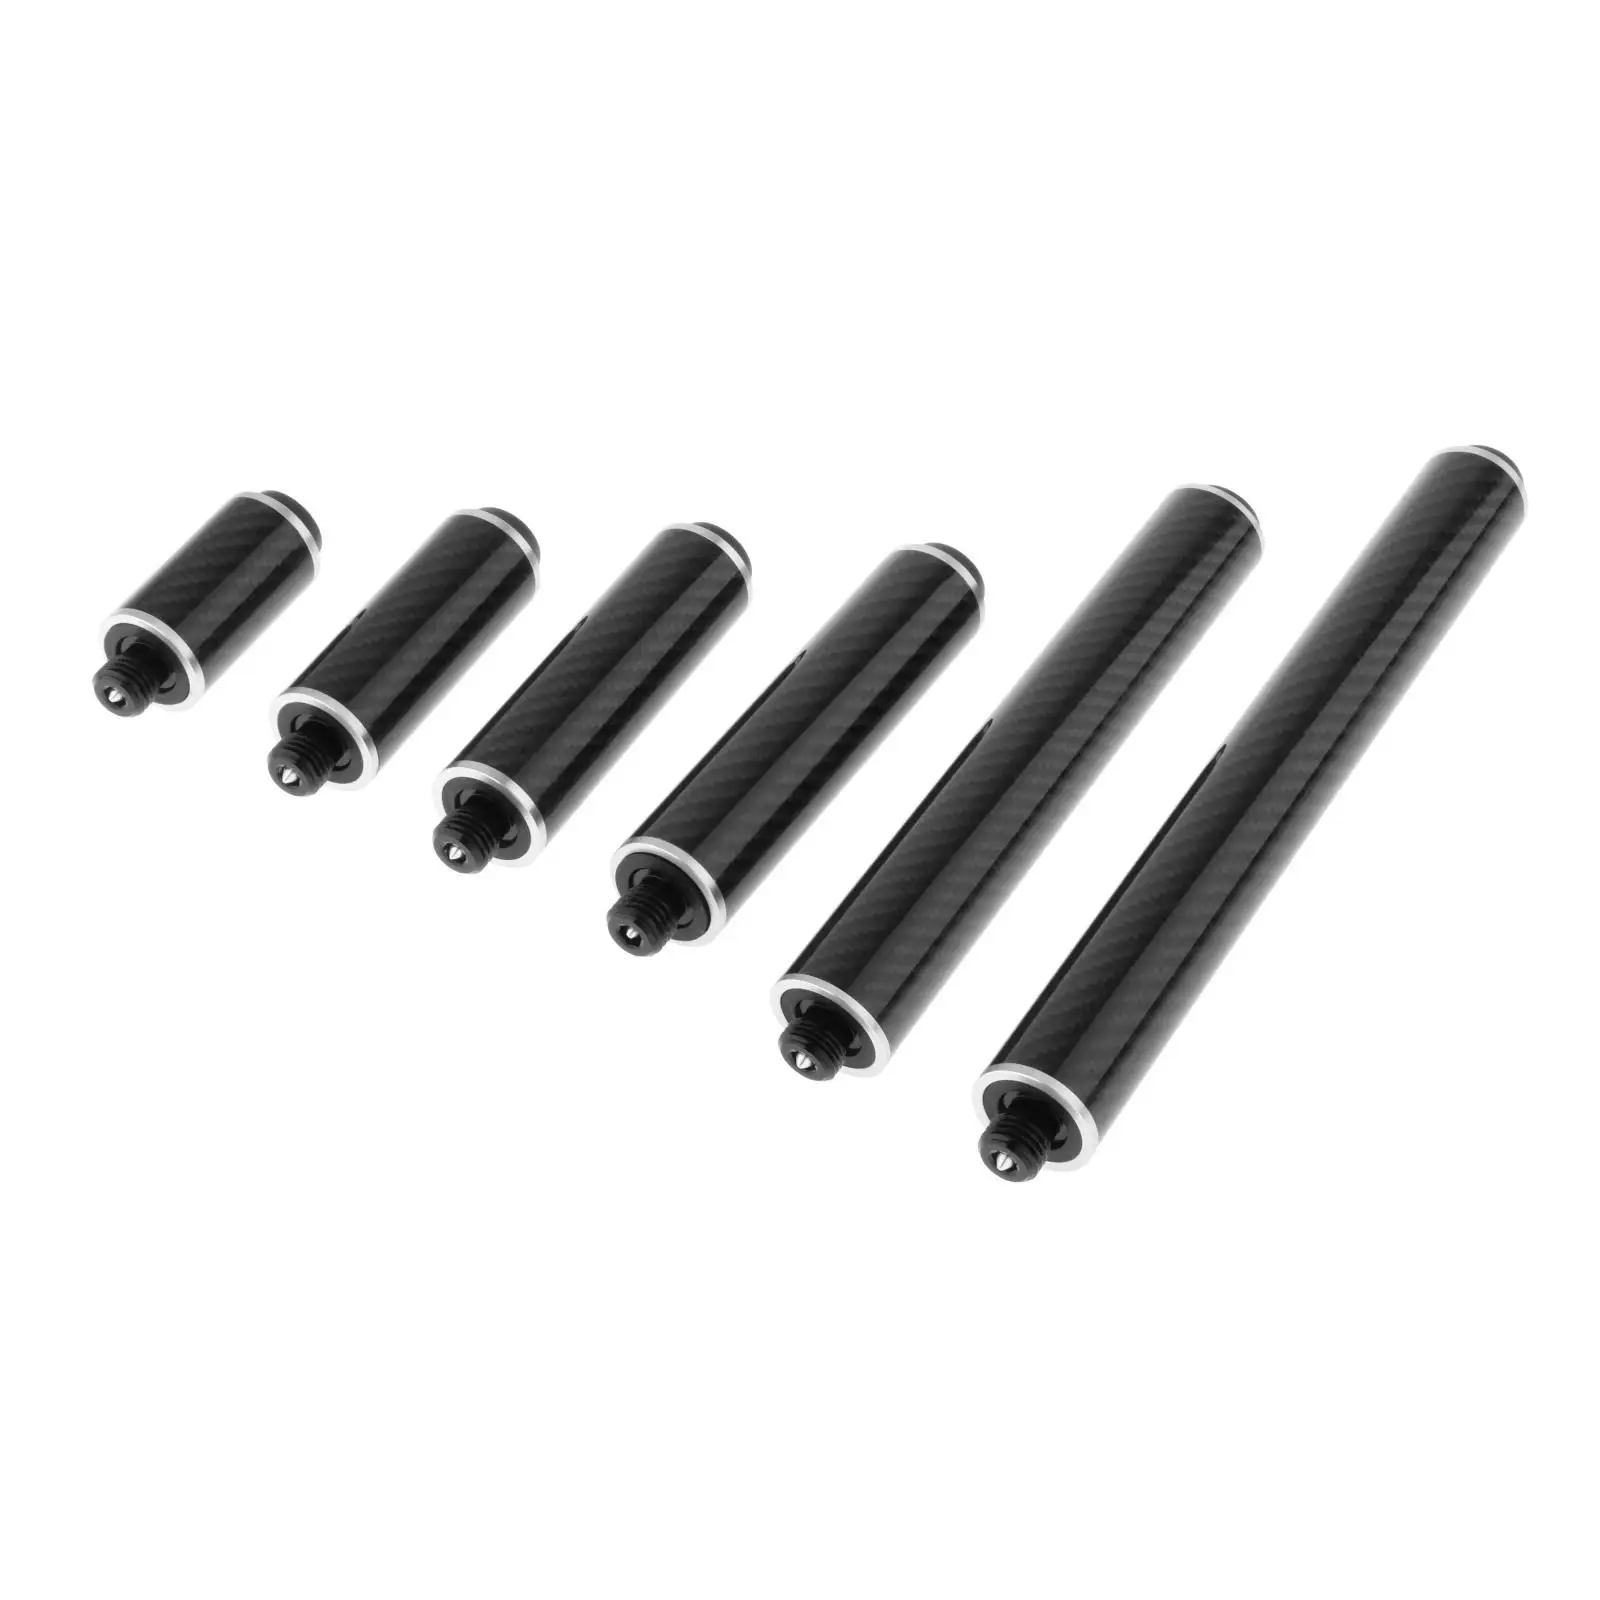 Snooker Cue Stick Extender Cue Extended Weights Replacement Billiards Pool Cue Extension for Games Entertainment Training Lovers